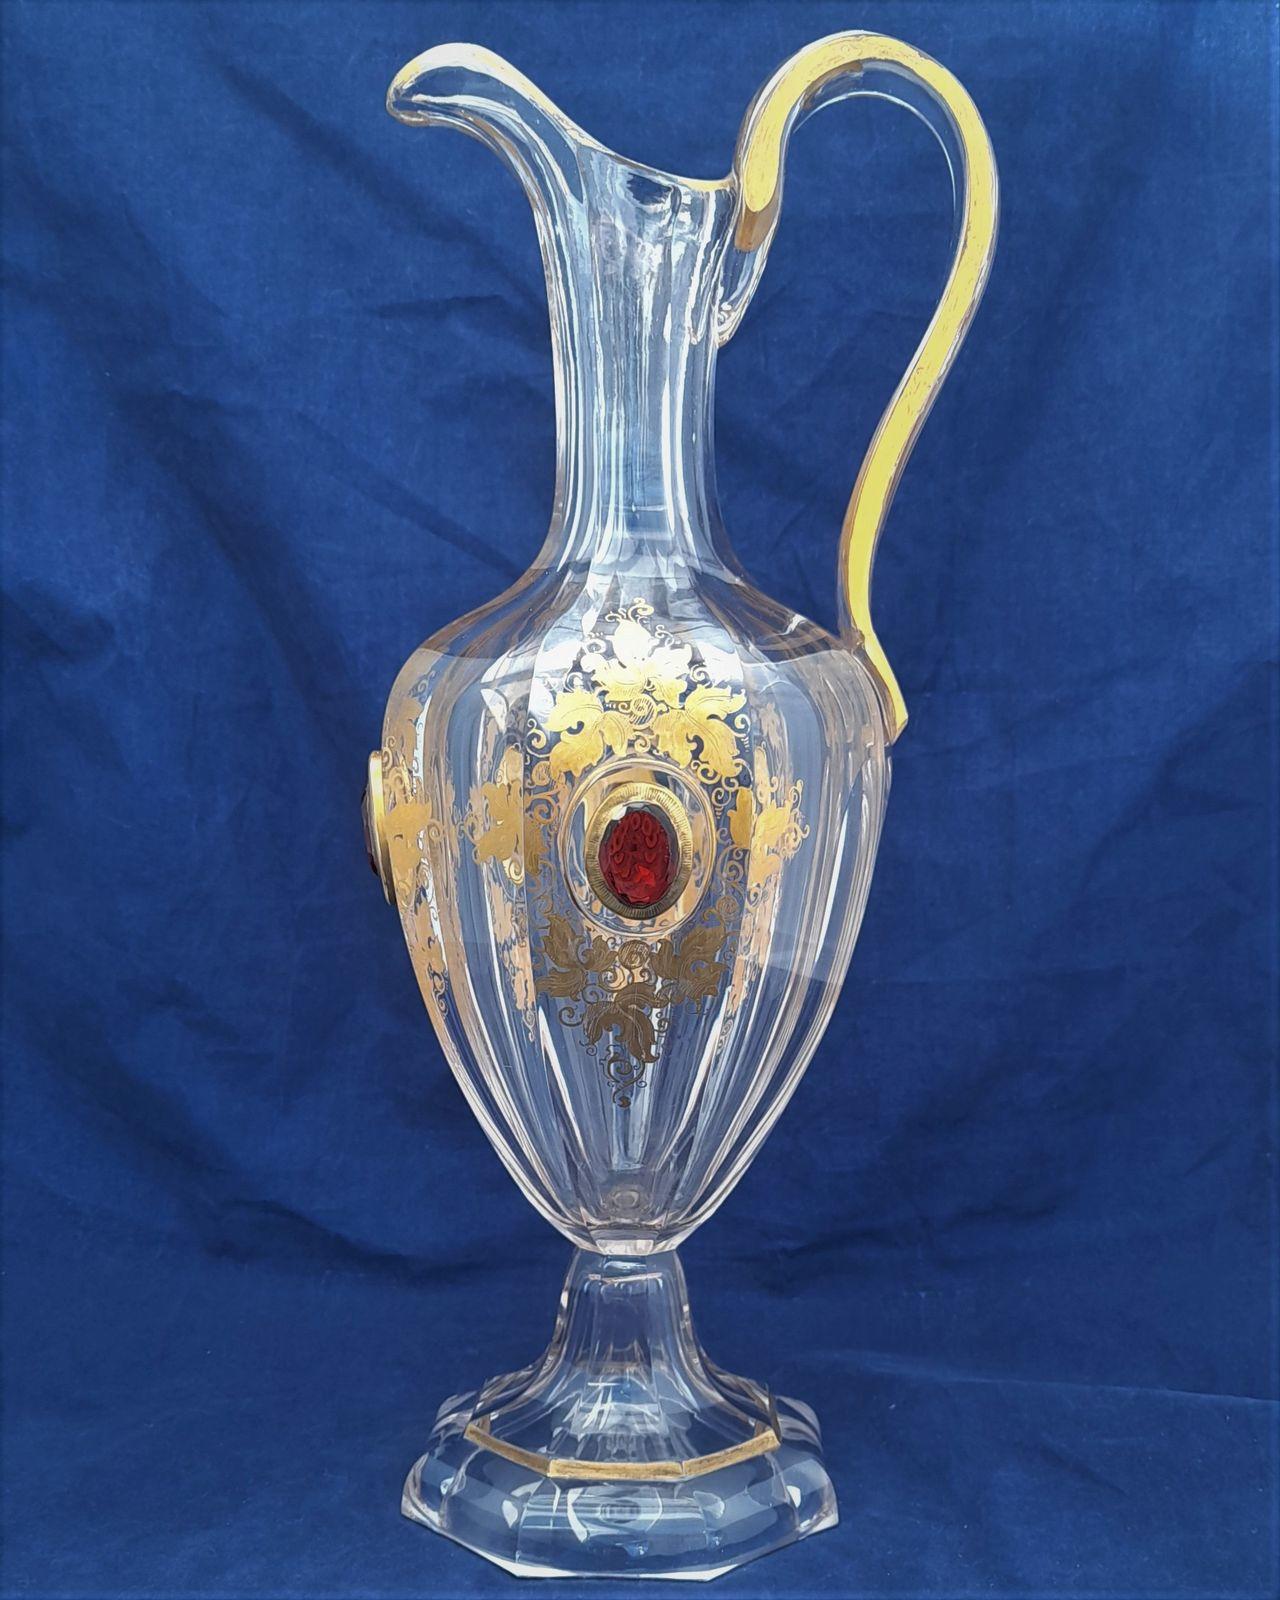 Antique Bohemian ruby red jewelled and gilded clear cut glass pedestal footed hexagonal oviform water jug circa 1870 34.5 cm high 12.8 cm diameter weighs 1246 grammes unpacked 900 ml capacity